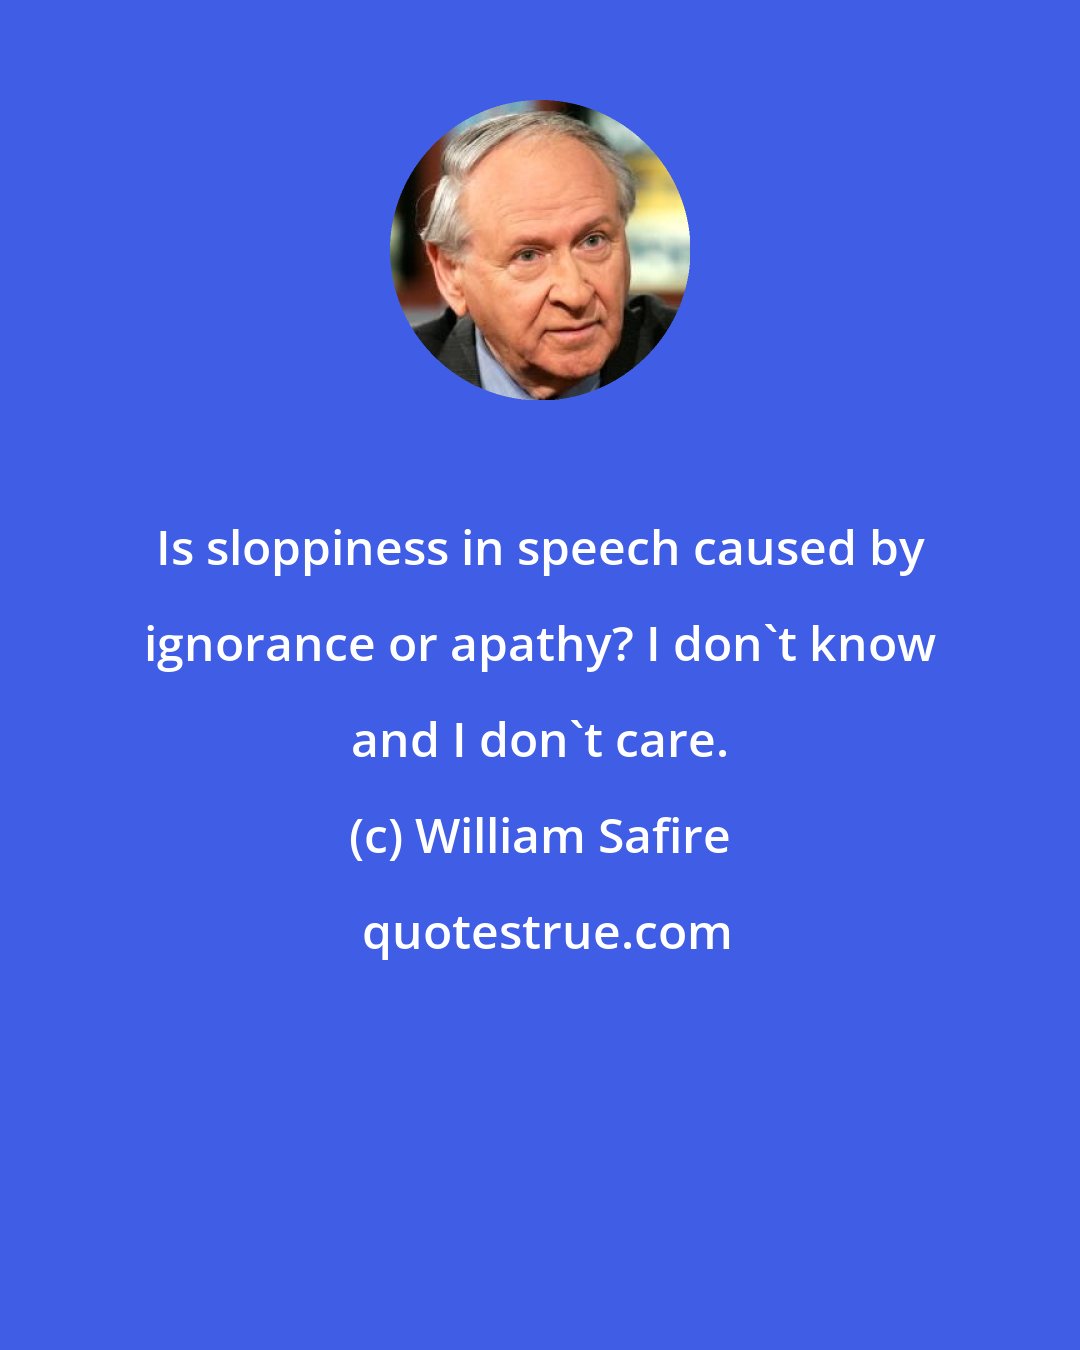 William Safire: Is sloppiness in speech caused by ignorance or apathy? I don't know and I don't care.